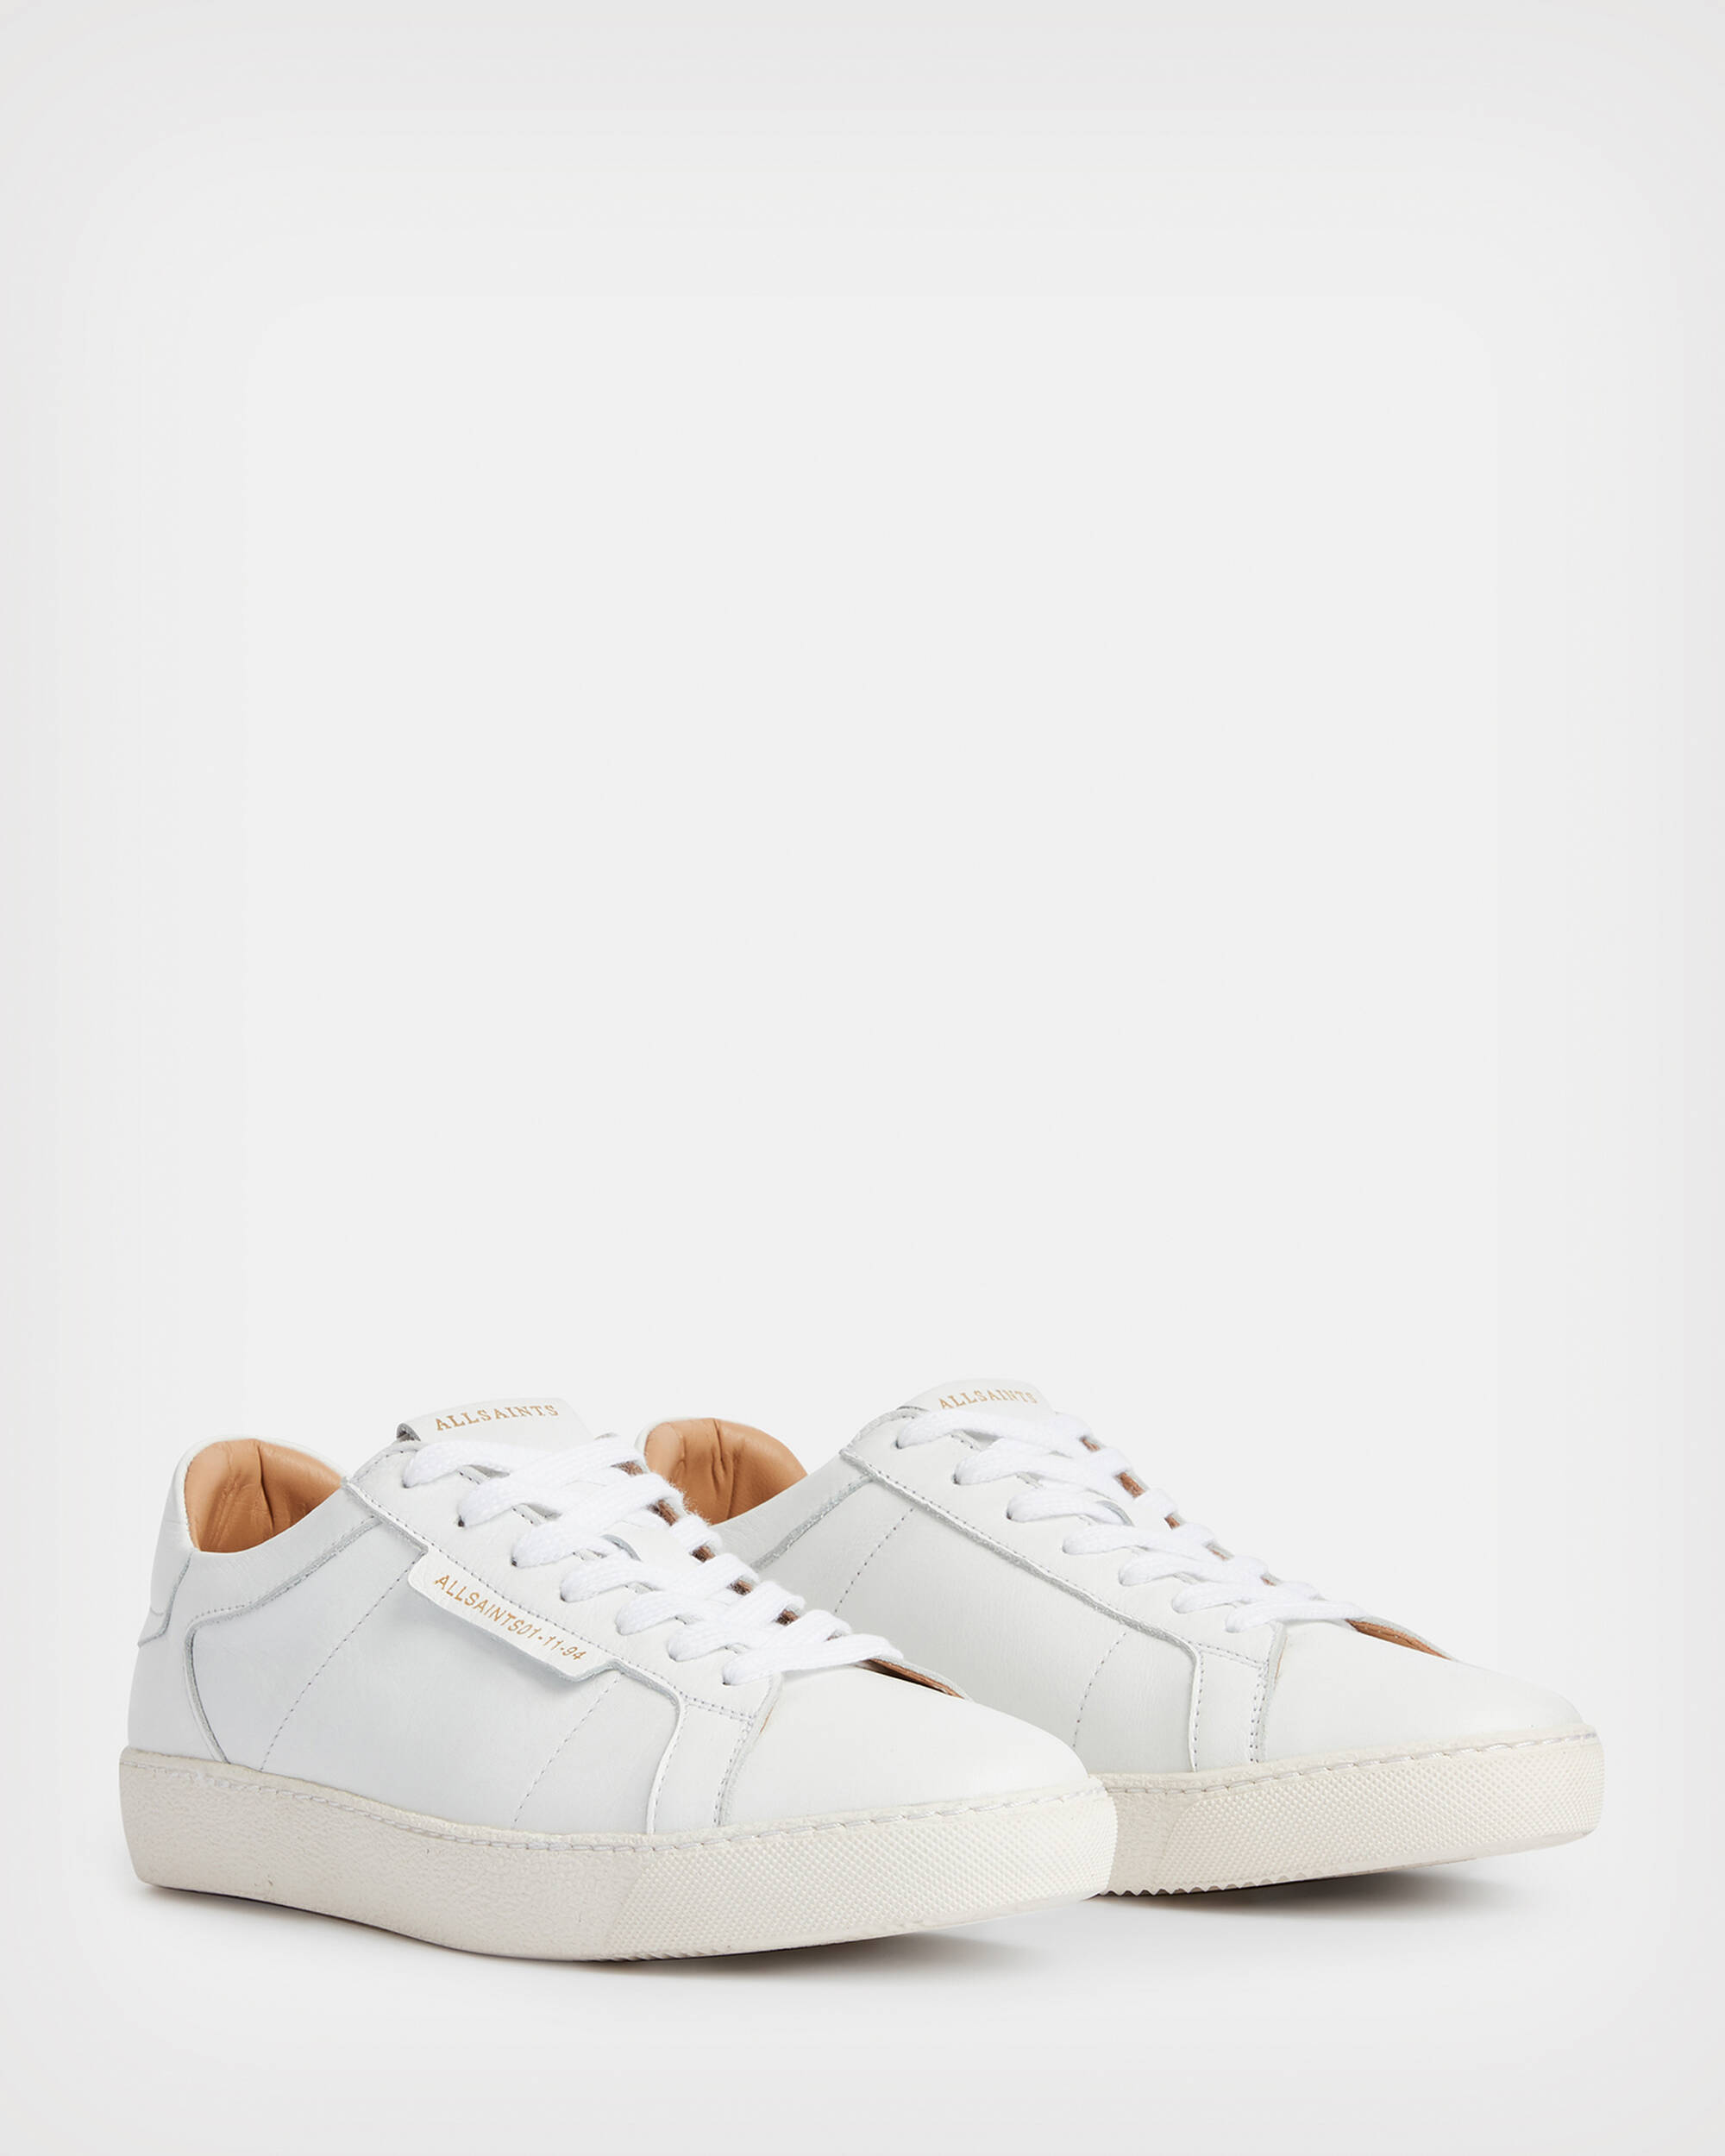 Sheer Leather Sneakers  large image number 5